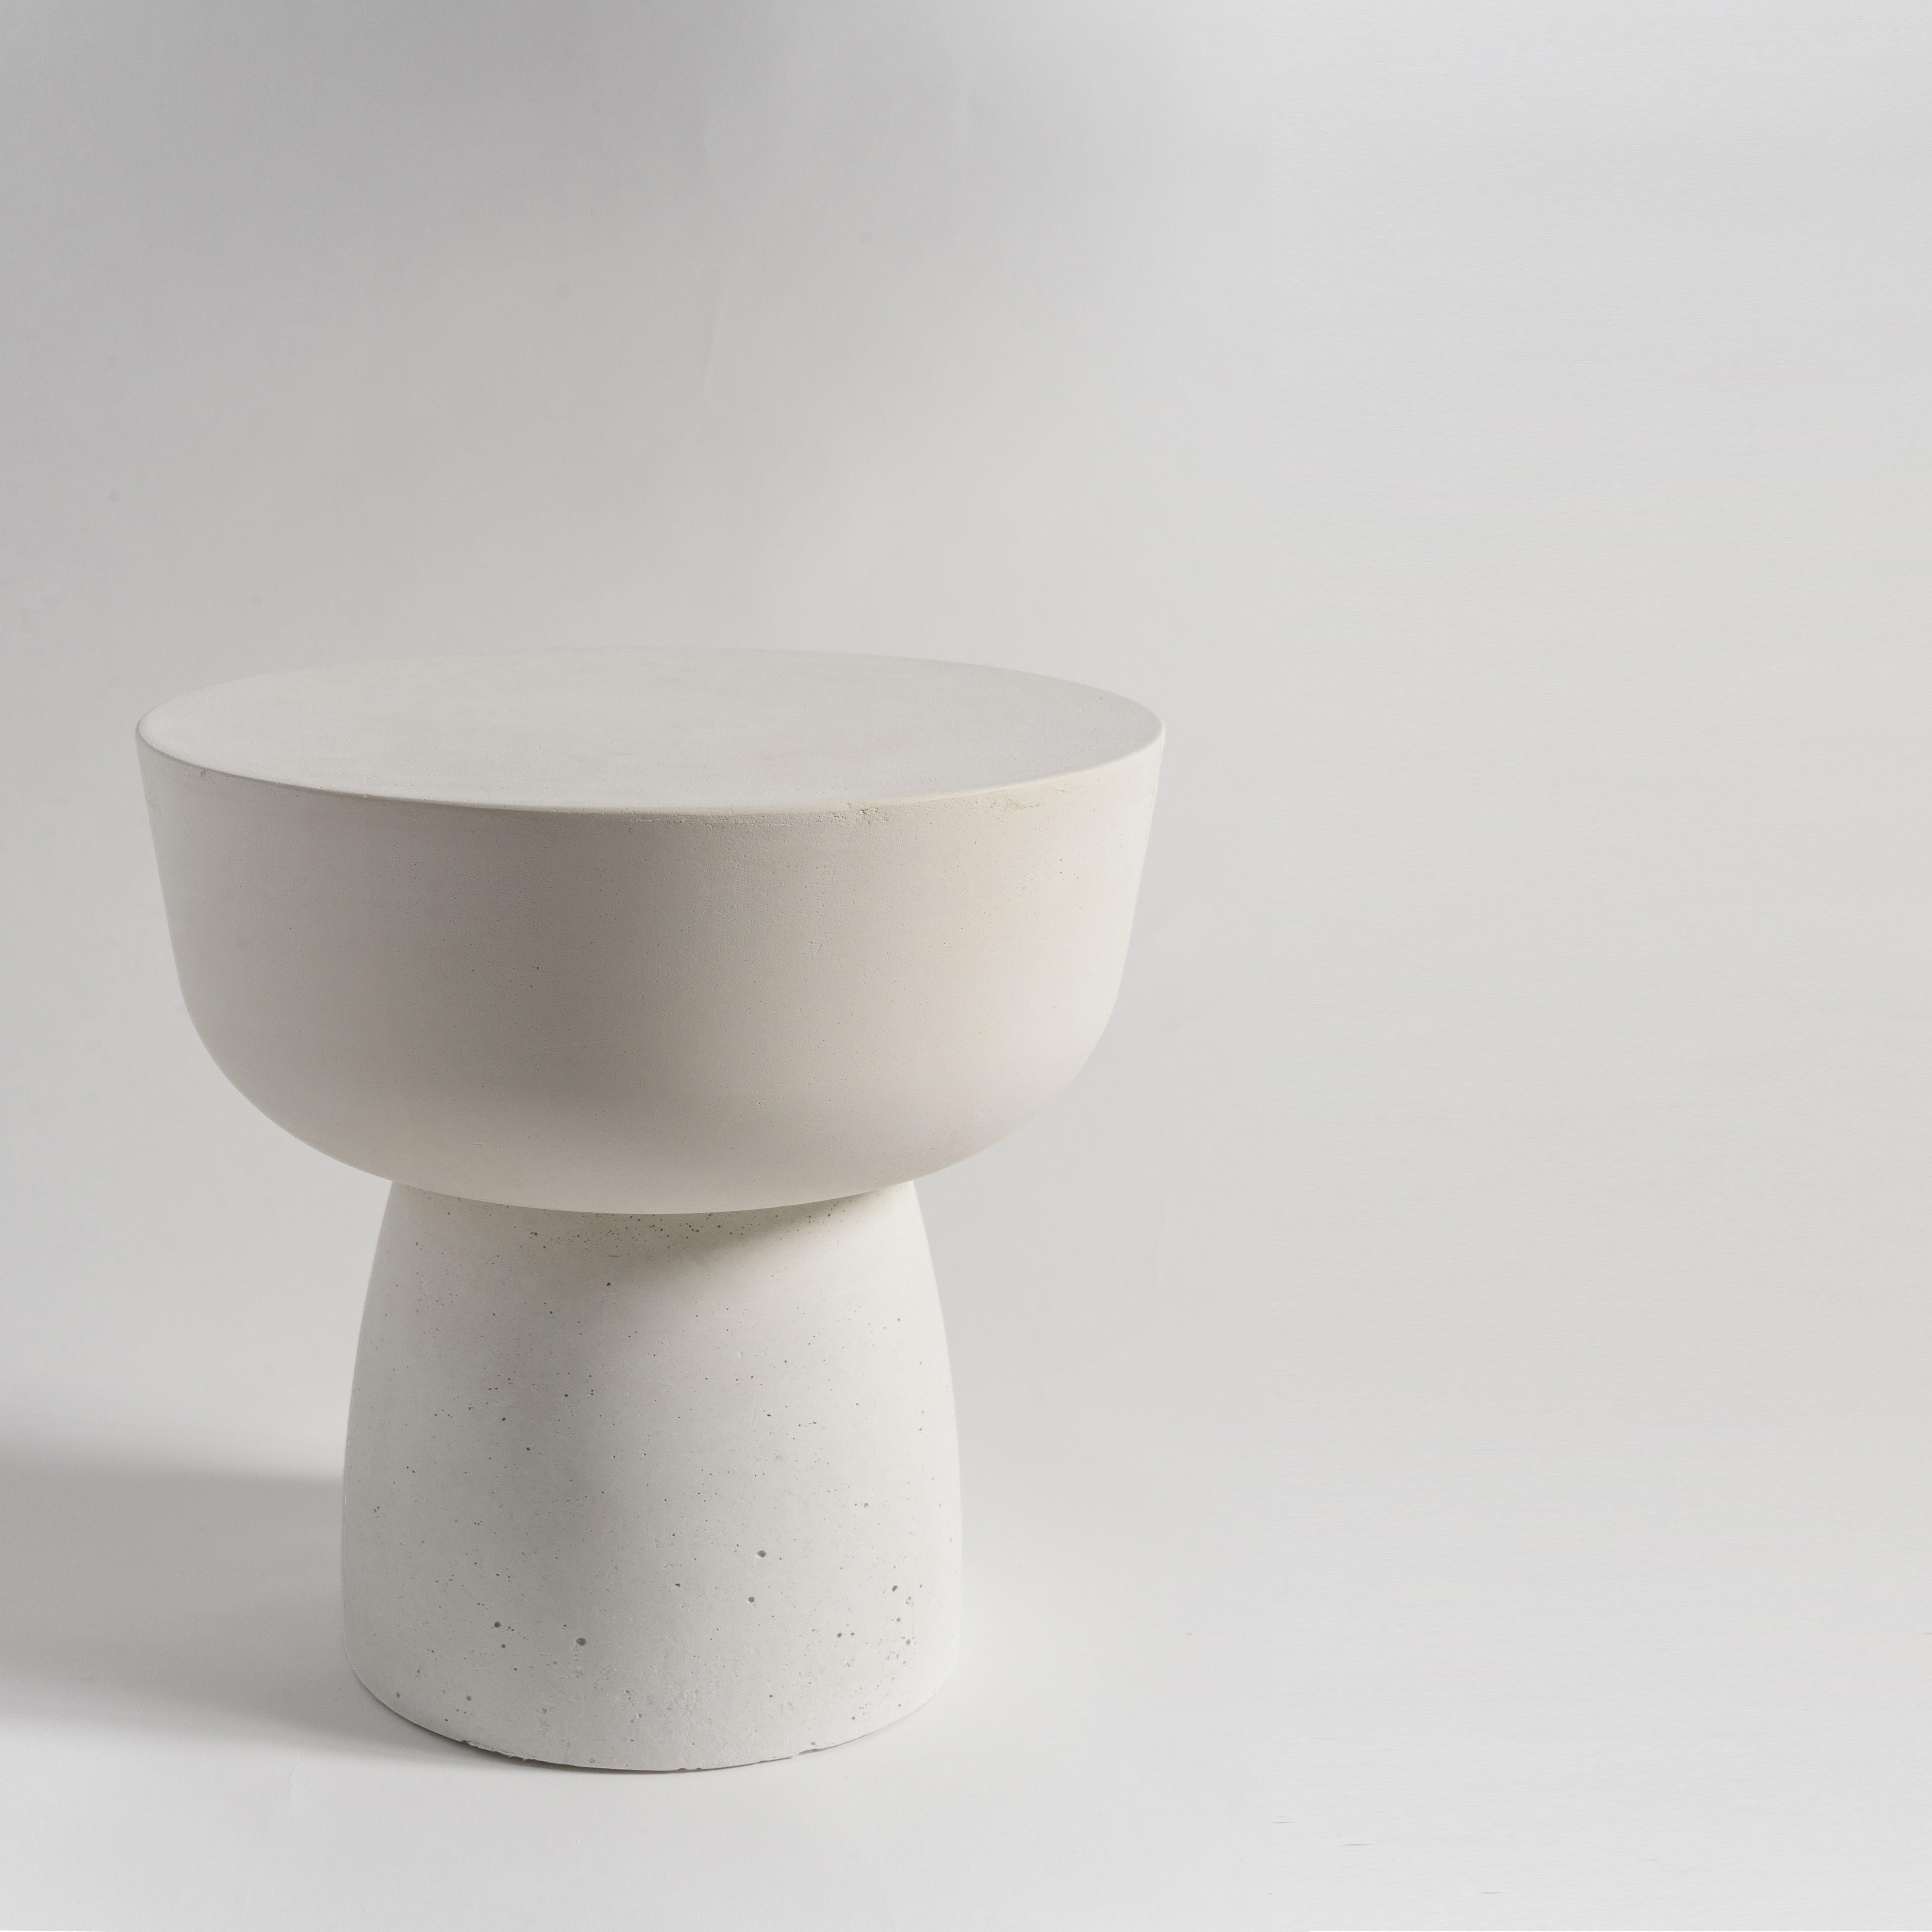 European 21st-century contemporary sculptural table 'MUSHROOM SOLID' in white cast stone - size TALL.

The 'Mushroom Solid' table is part of our mono-material object collection. A rather sculptural piece of furniture, it is both dominant and serene